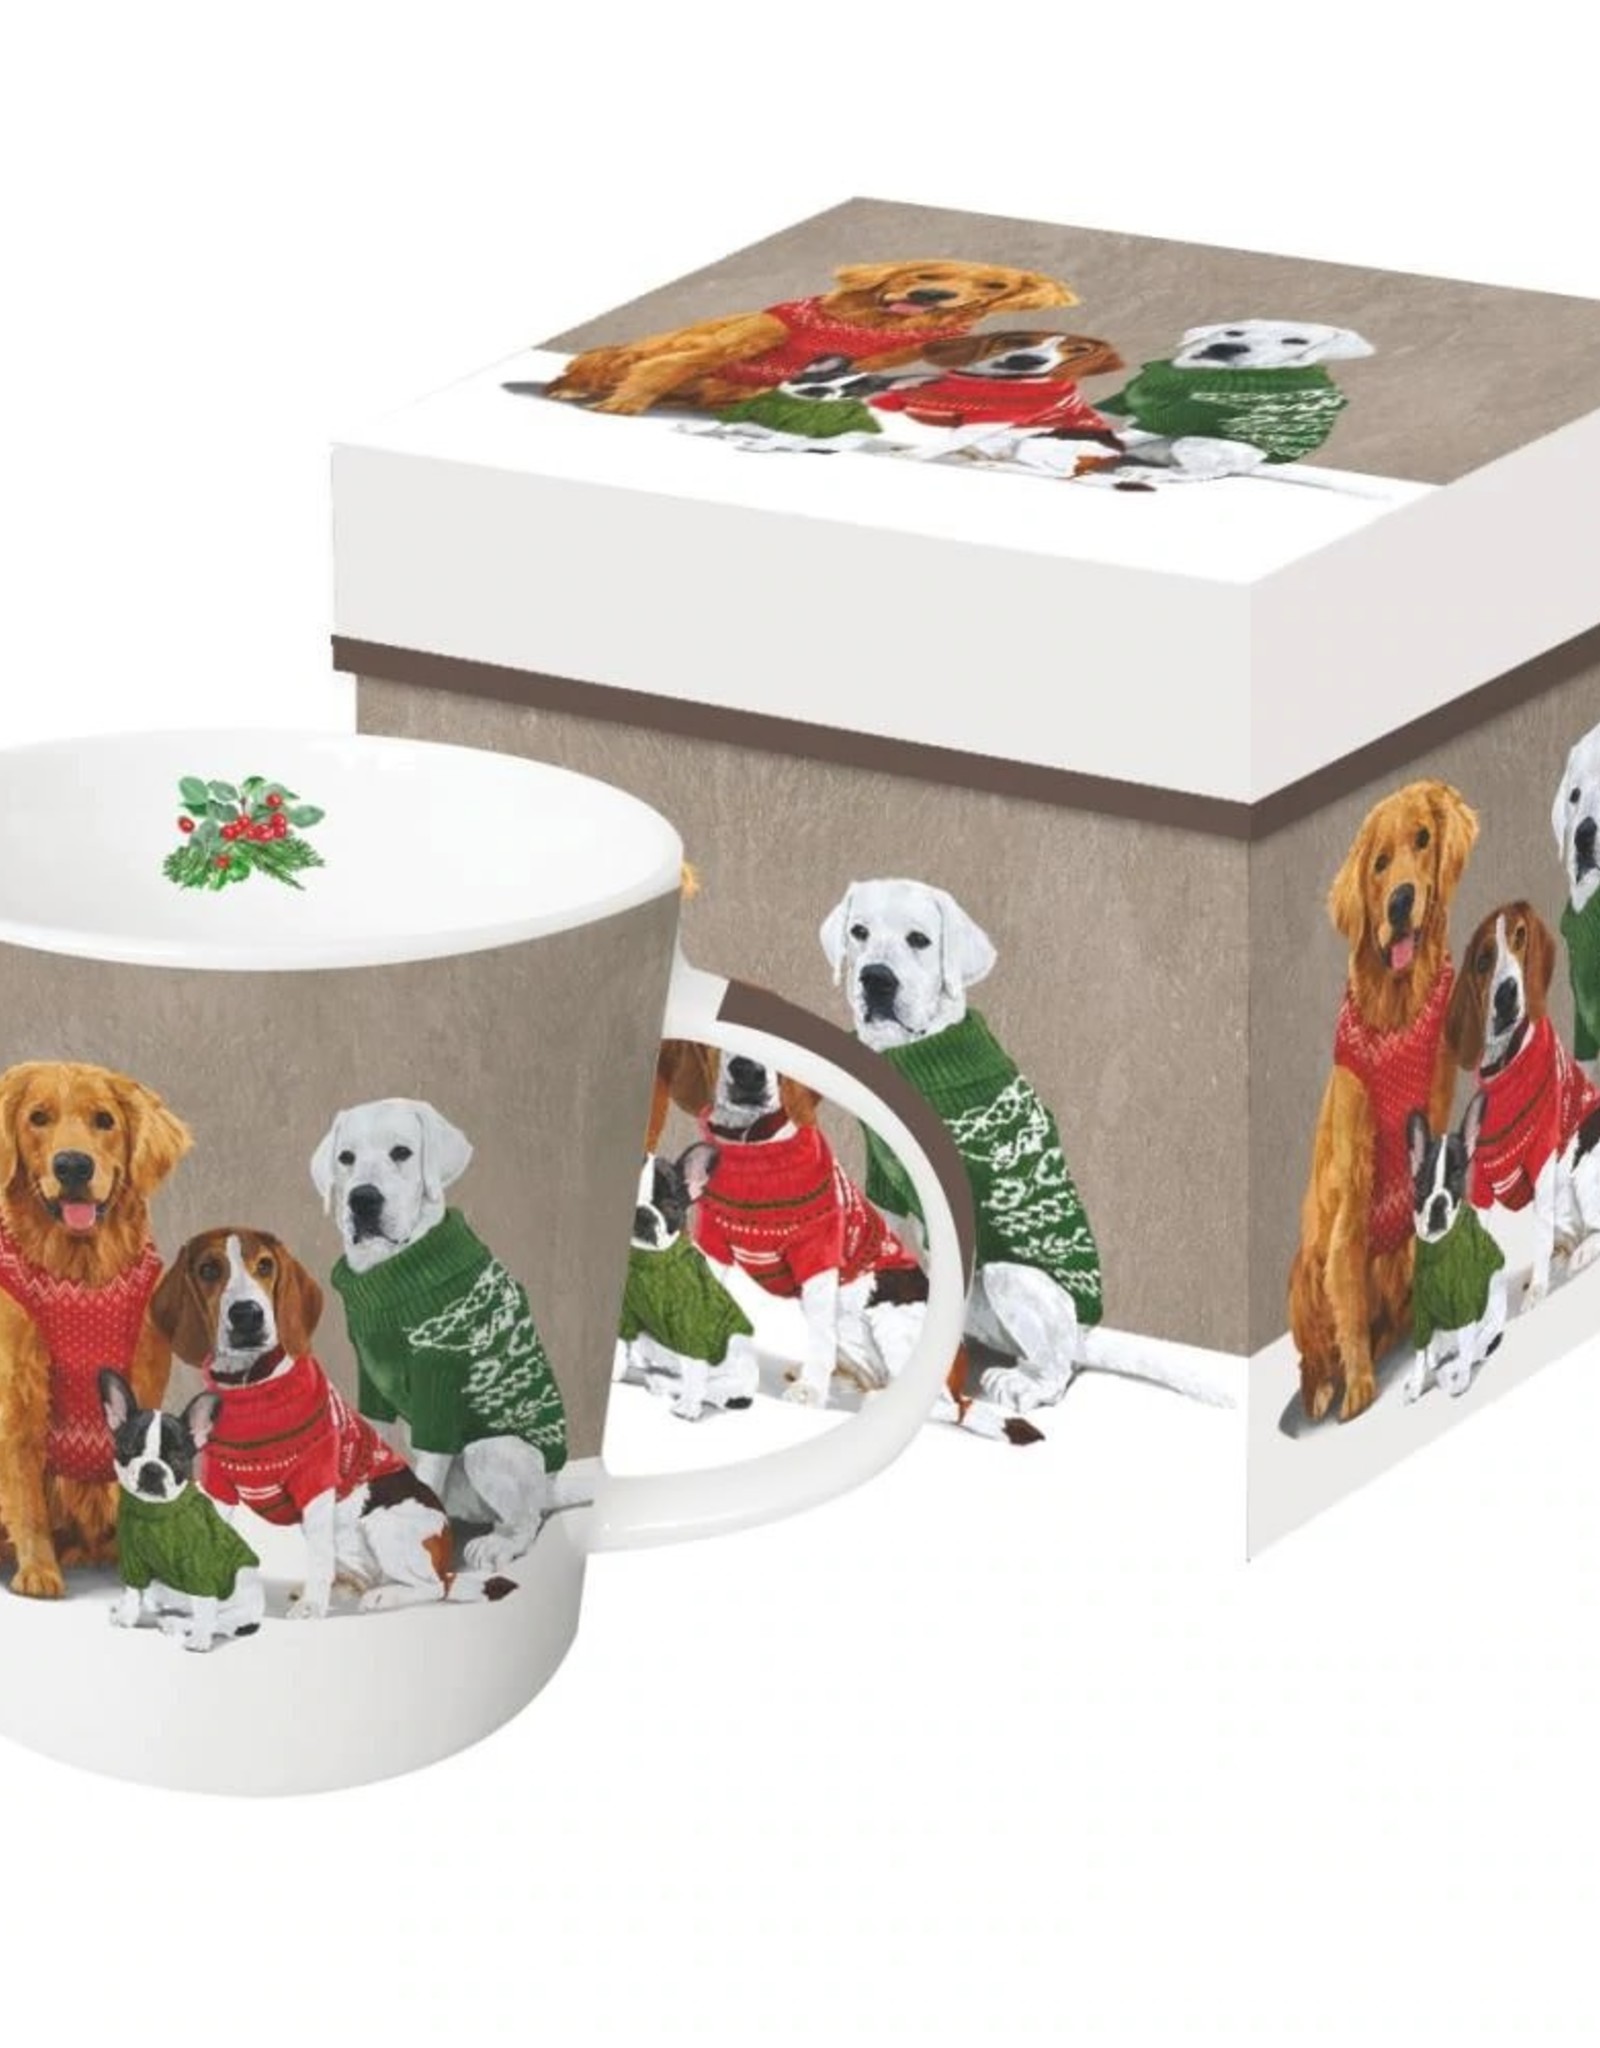 Paper Products Designs SWEATER DOGS MUG IN GIFT BOX